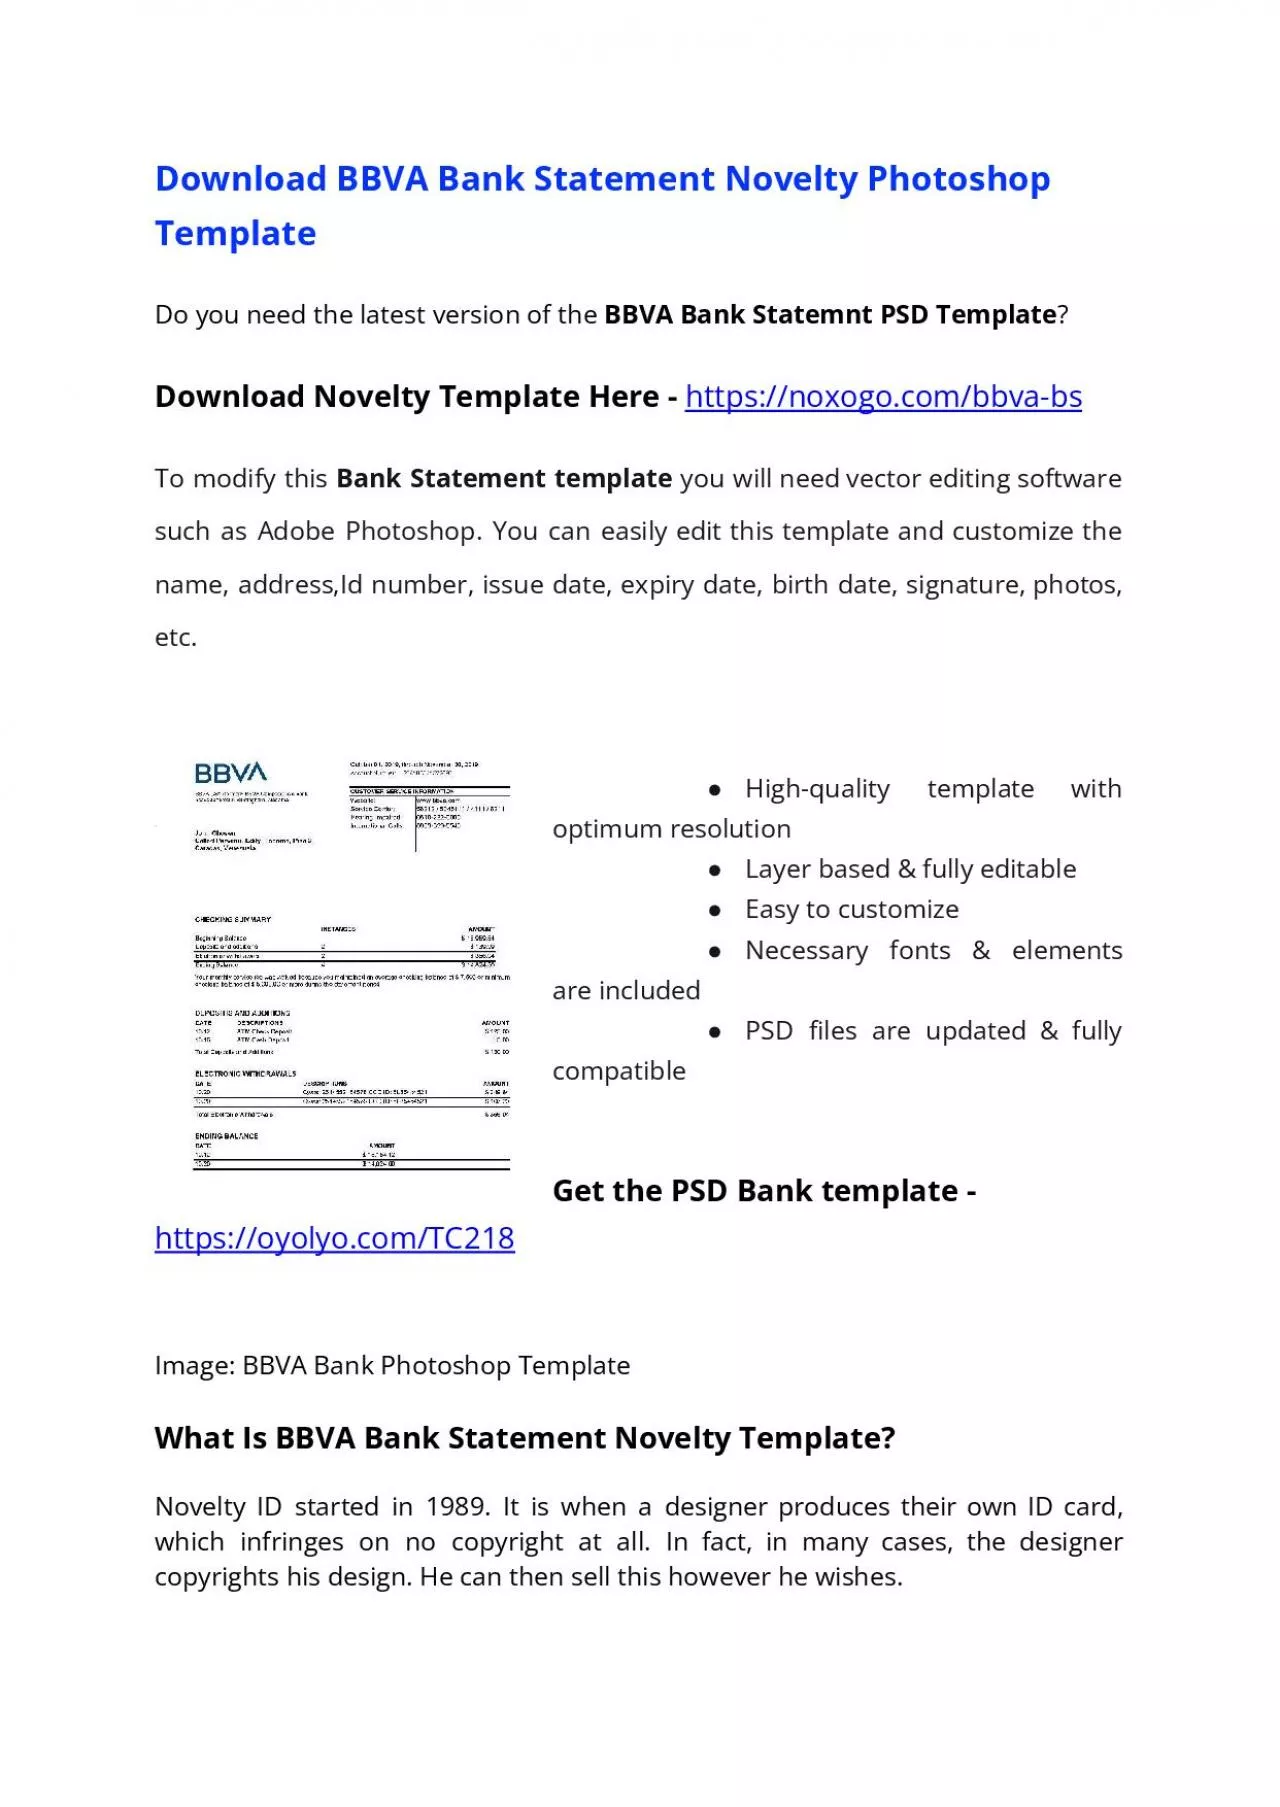 BBVA Bank Statement Template – Download MS Word File